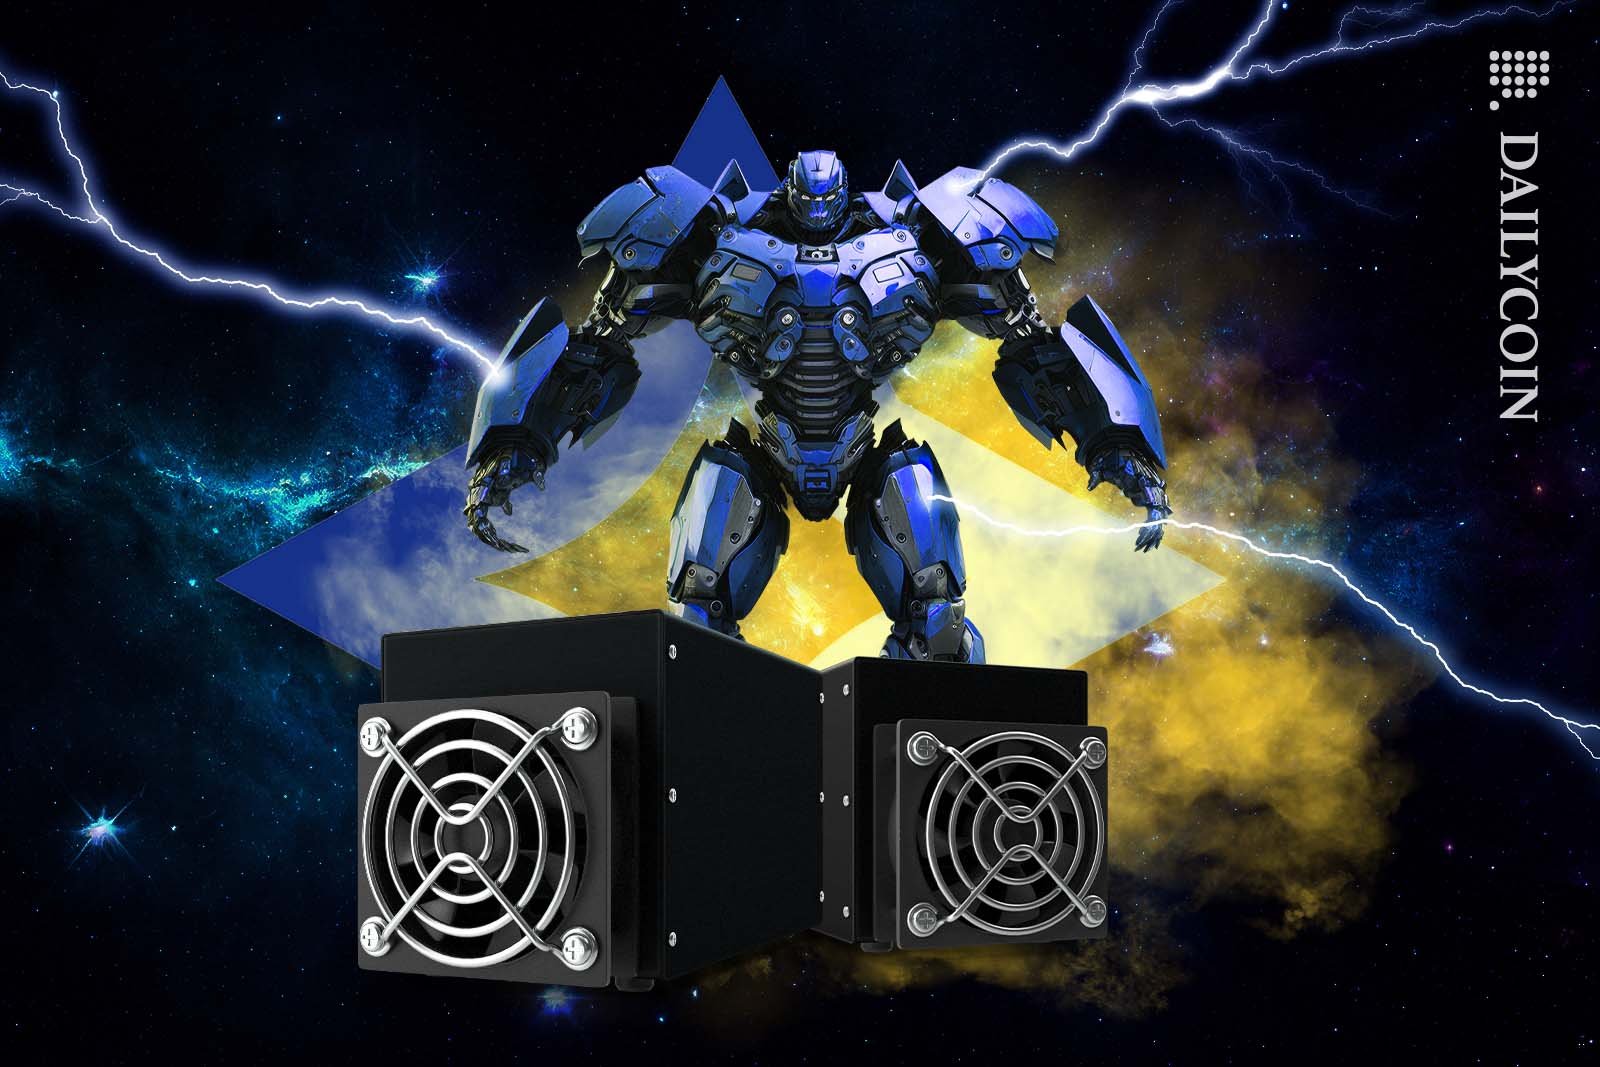 Big robot in space flexing behind two humongous crypto miners.